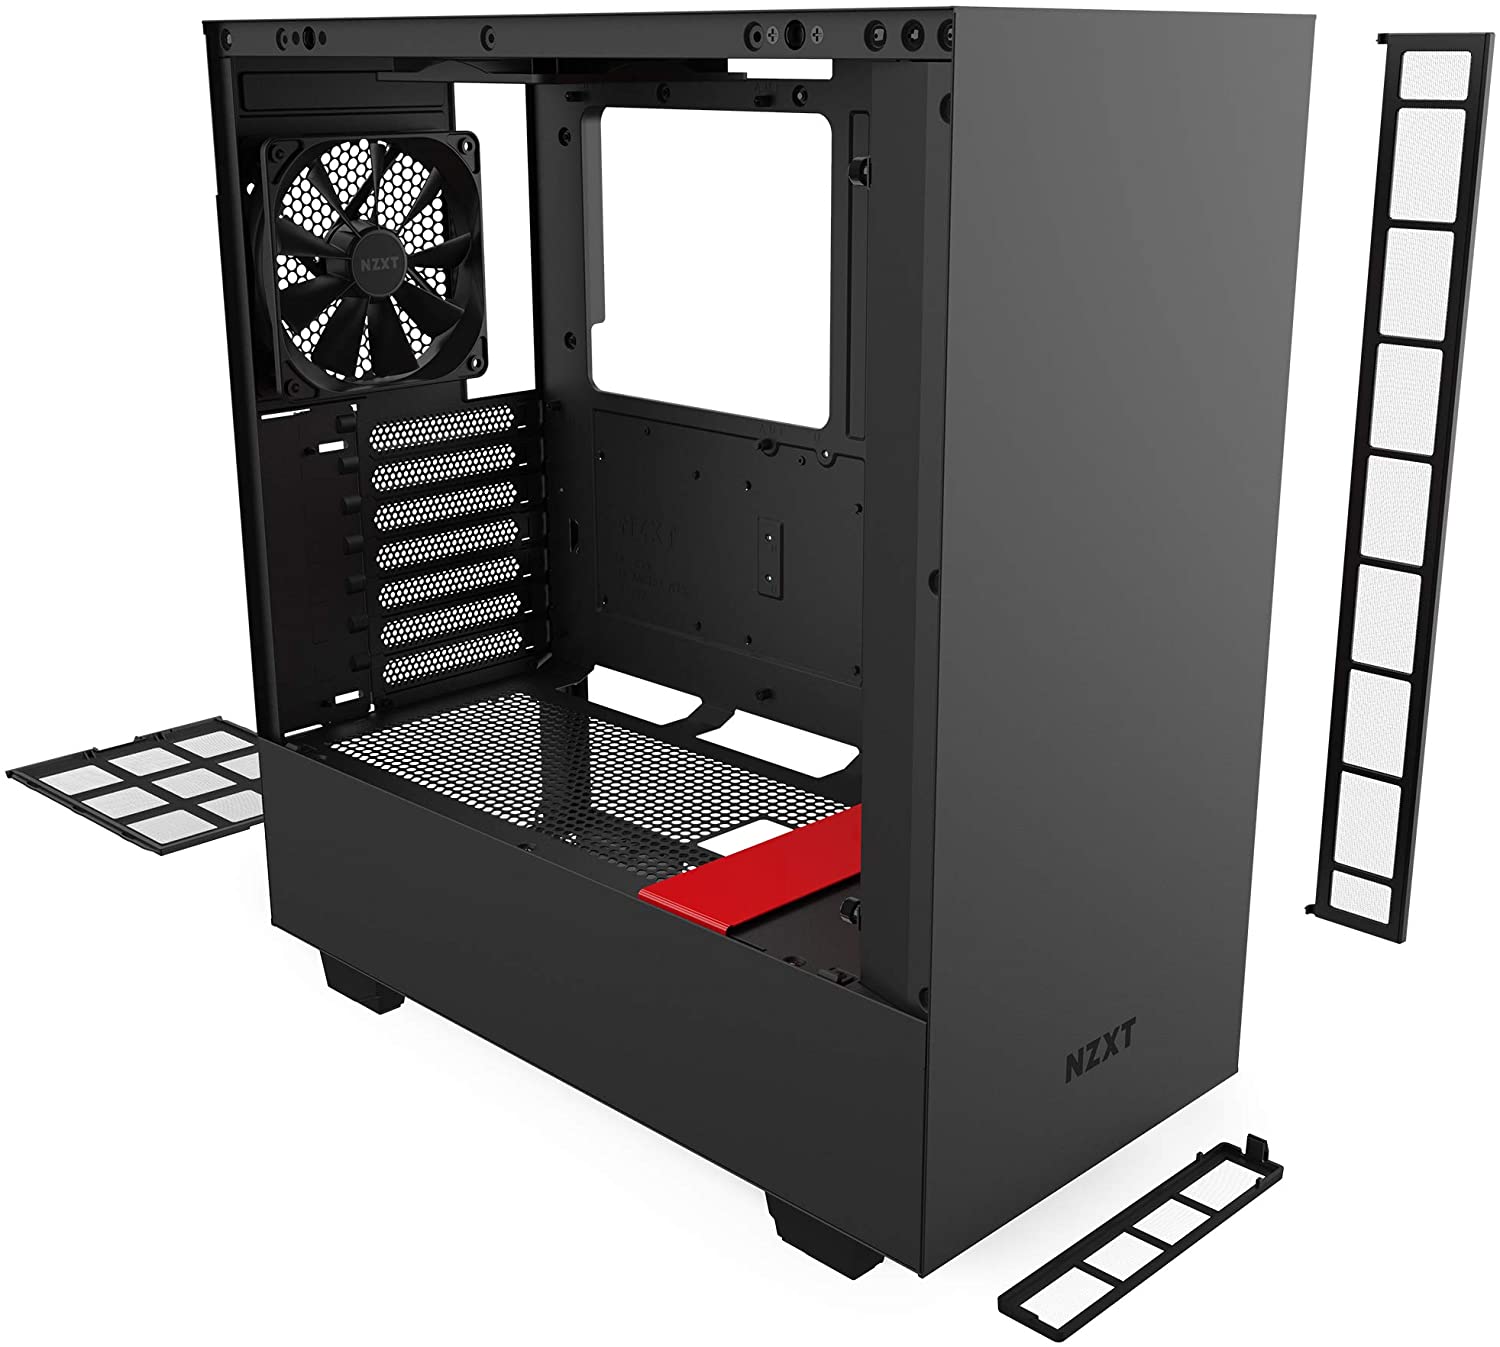 NZXT H510, Compact ATX Mid-Tower PC Gaming Case, Front I/O USB Type-C Port, Tempered Glass Side Panel, Cable Management System, Water-Cooling Ready, Steel Construction, Black/Red